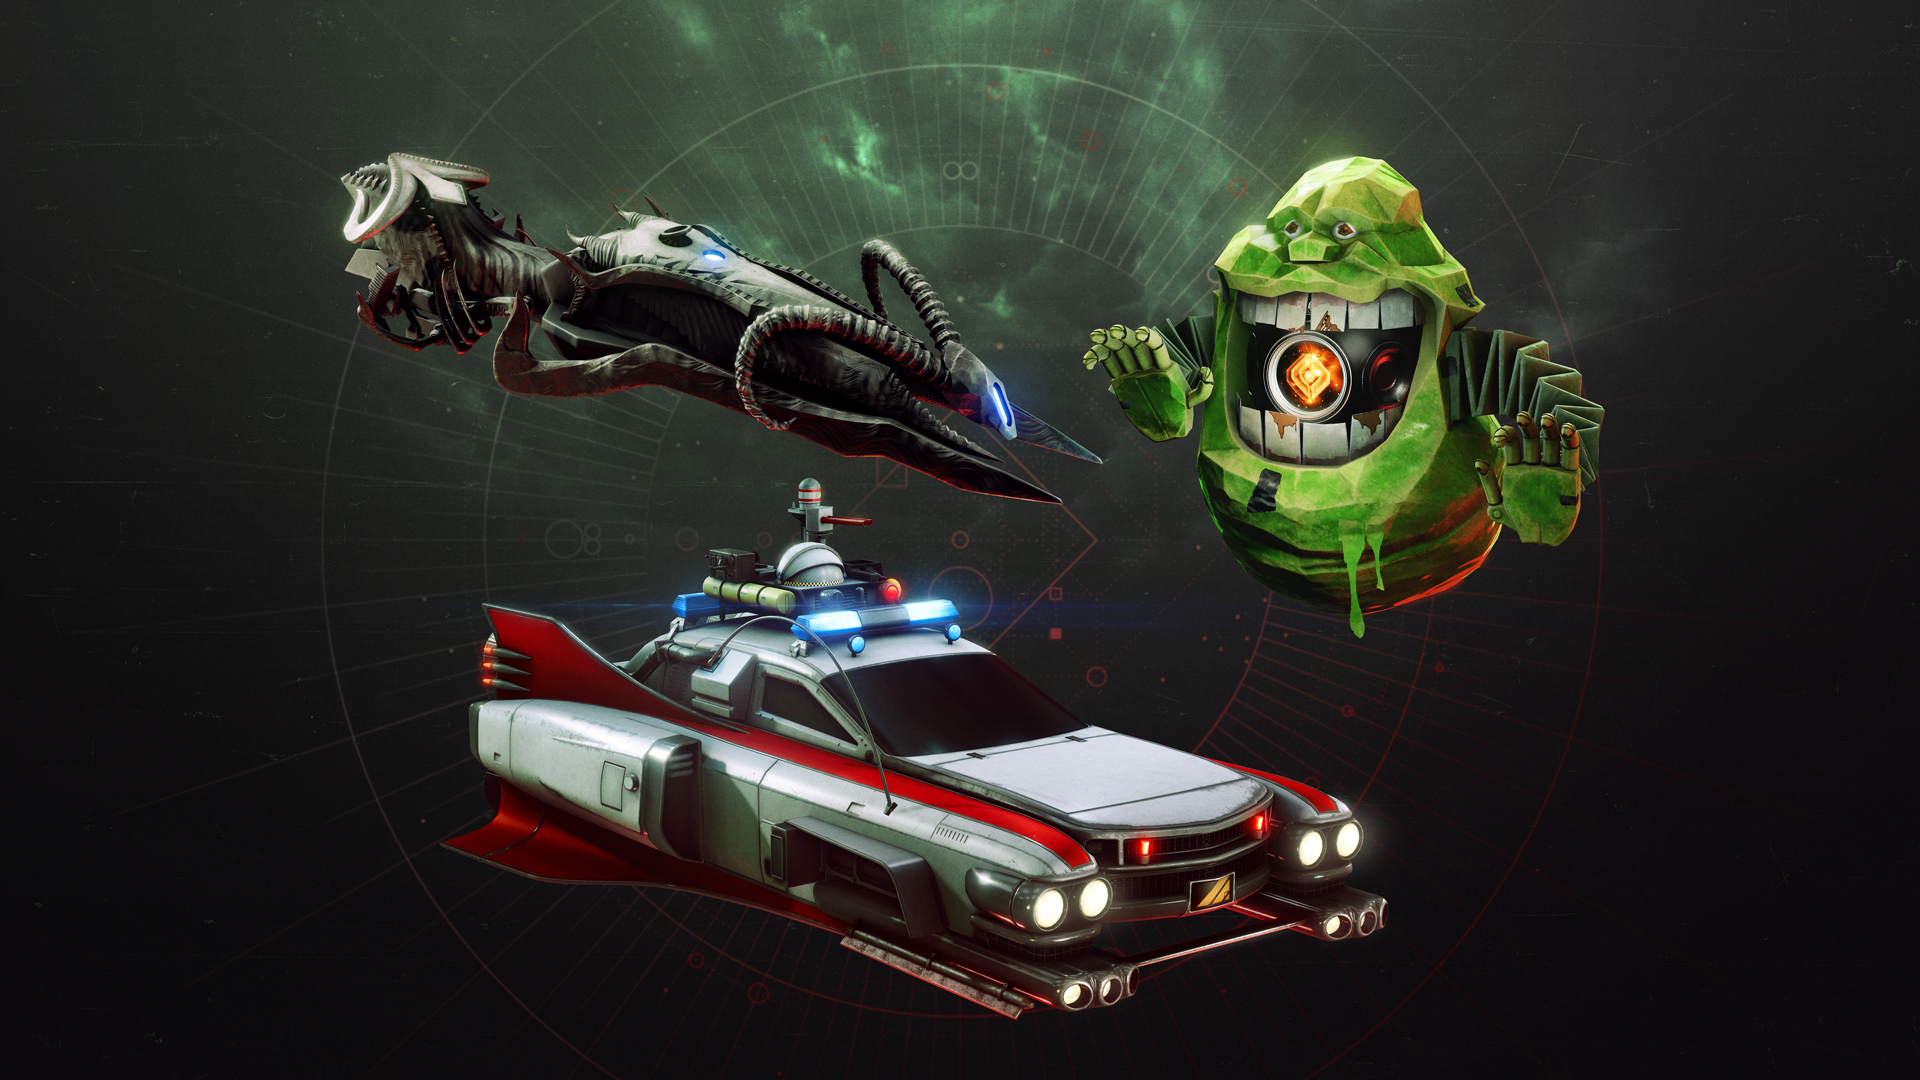 Destiny 2 - Ghostbusters crossover promo image - Slimer Guardian Ghost, a new Sparrow inspired by Garraka, and an Ecto-1-themed Ship